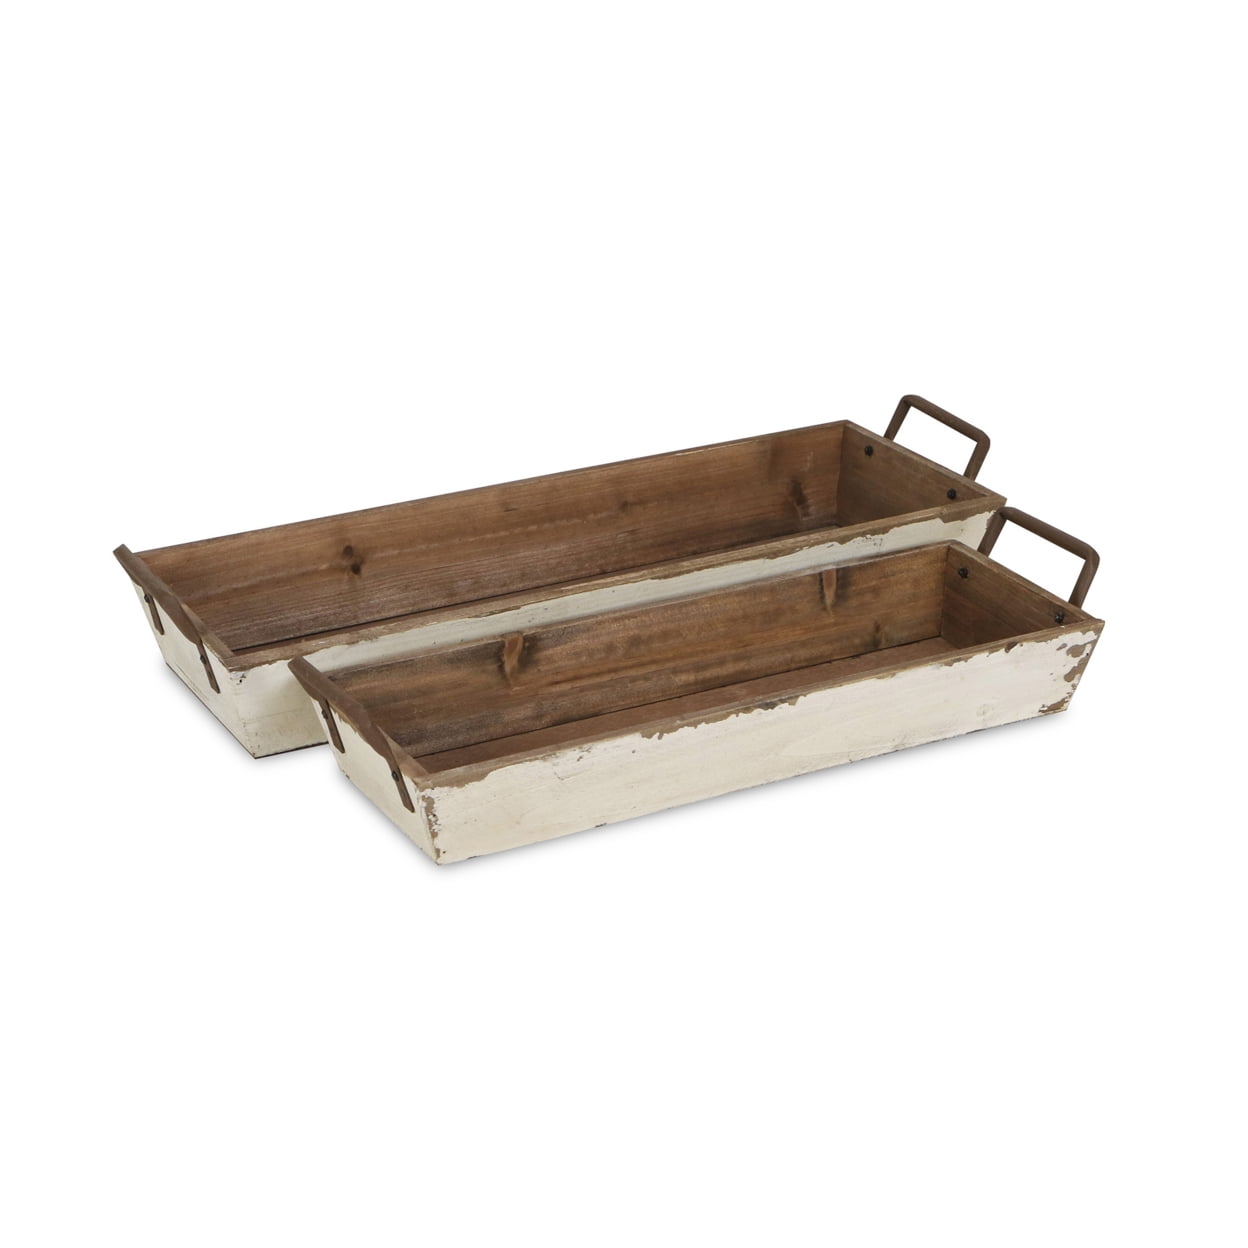 Cheung Fp-3874-2w Wooden Tapered Storage Tray With Side Metal Handles, Set Of 2